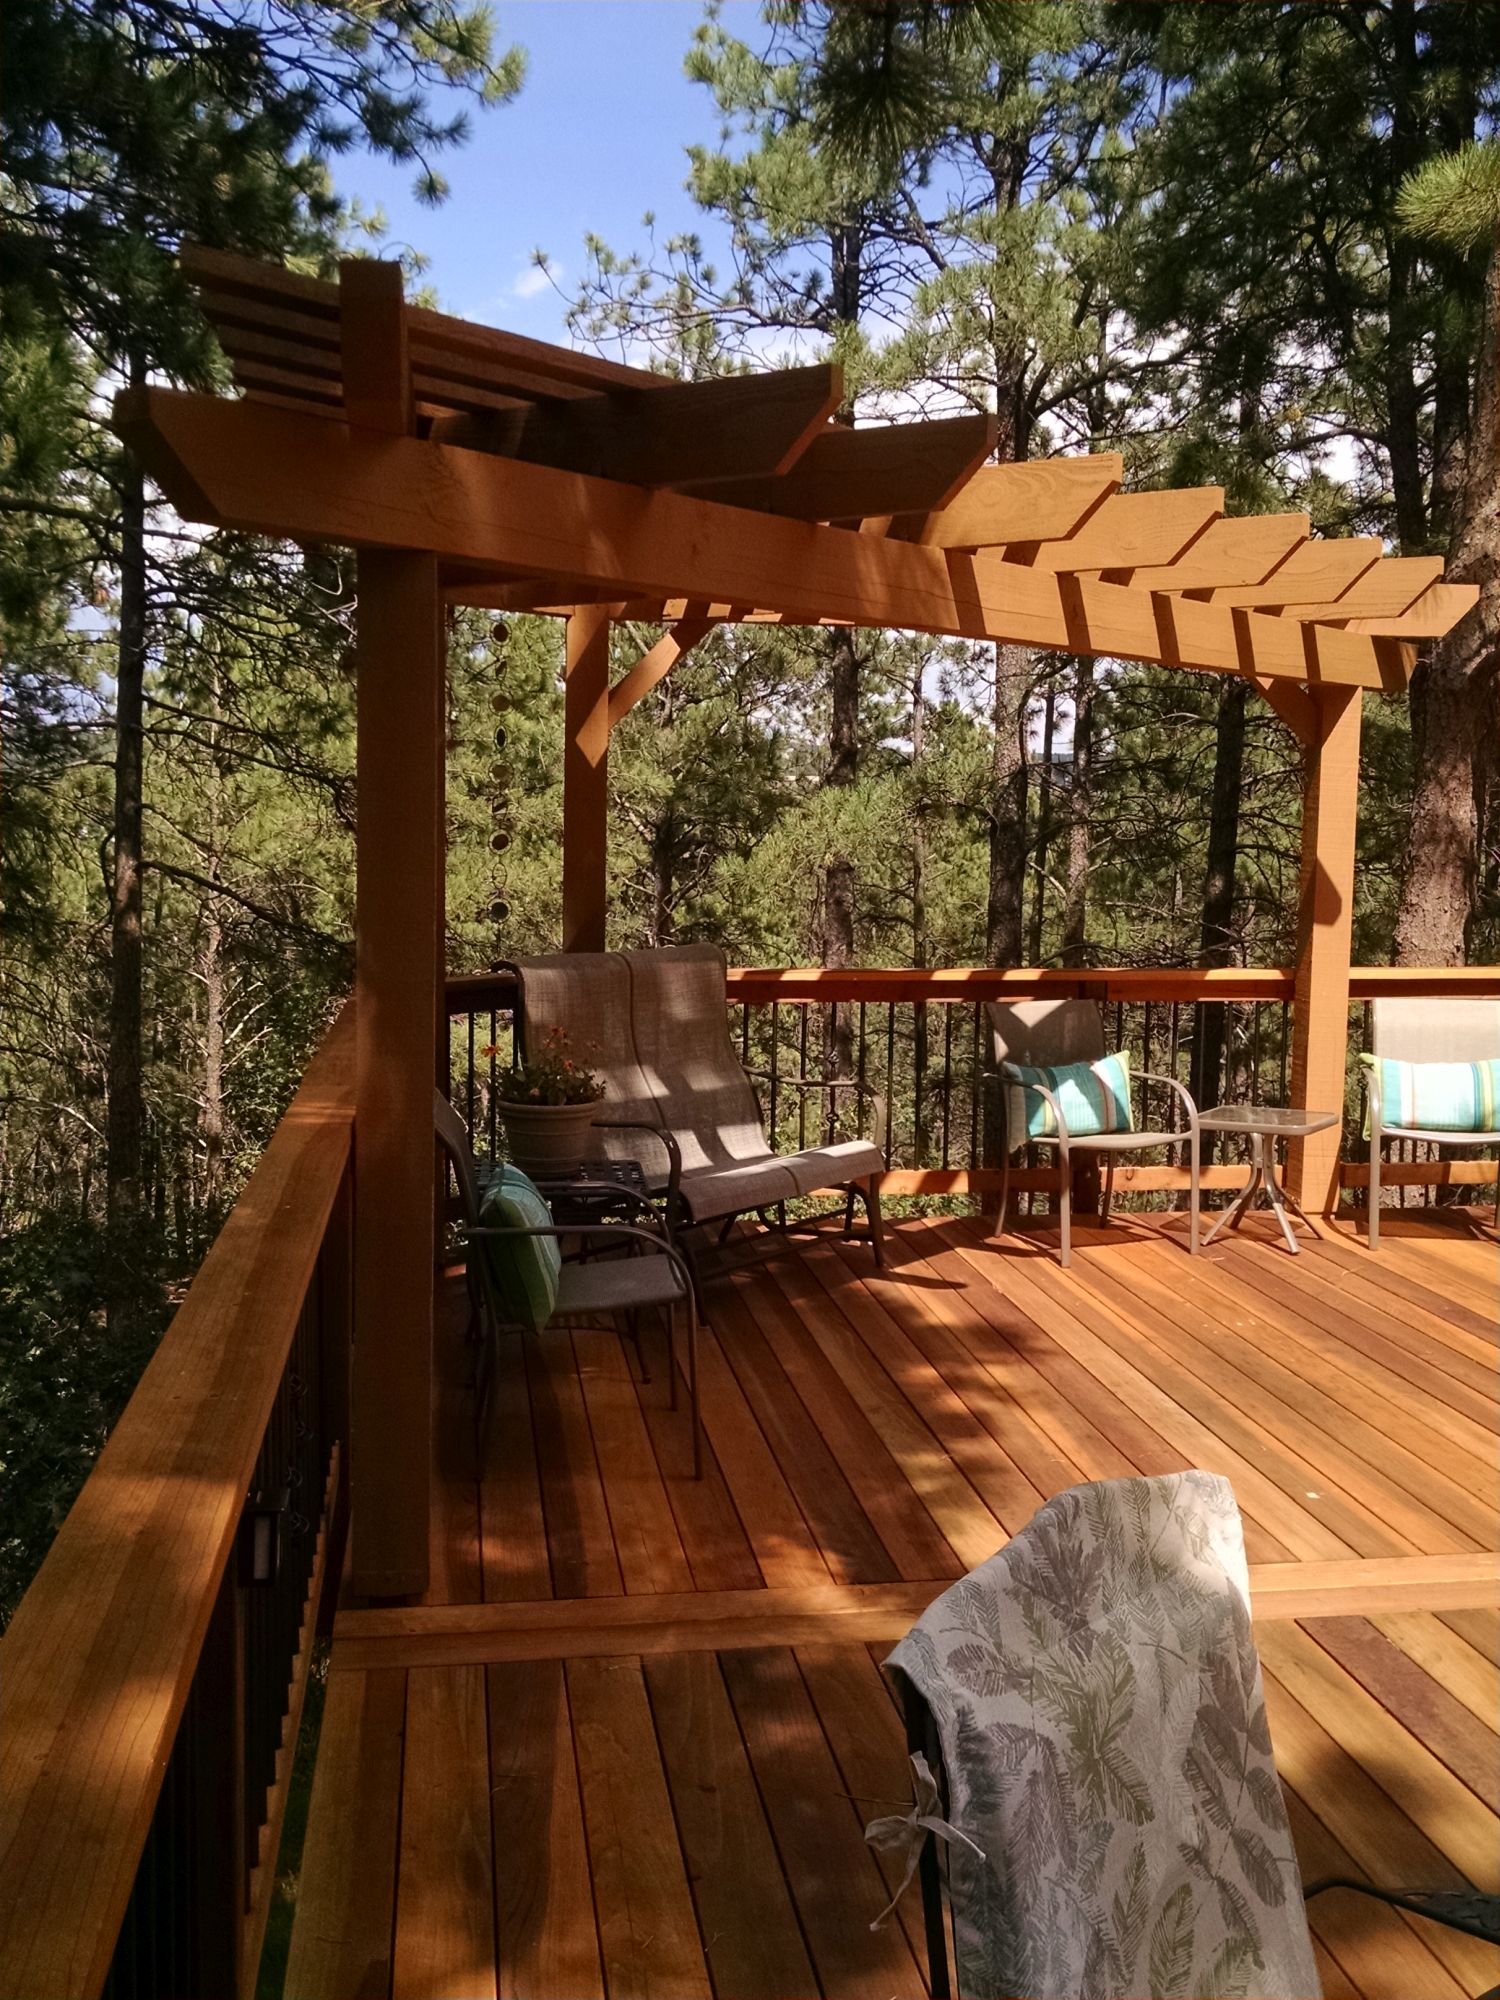 B-grade Redwood deck with a tri-corner pergola creates a gorgeous seating area in the forest.